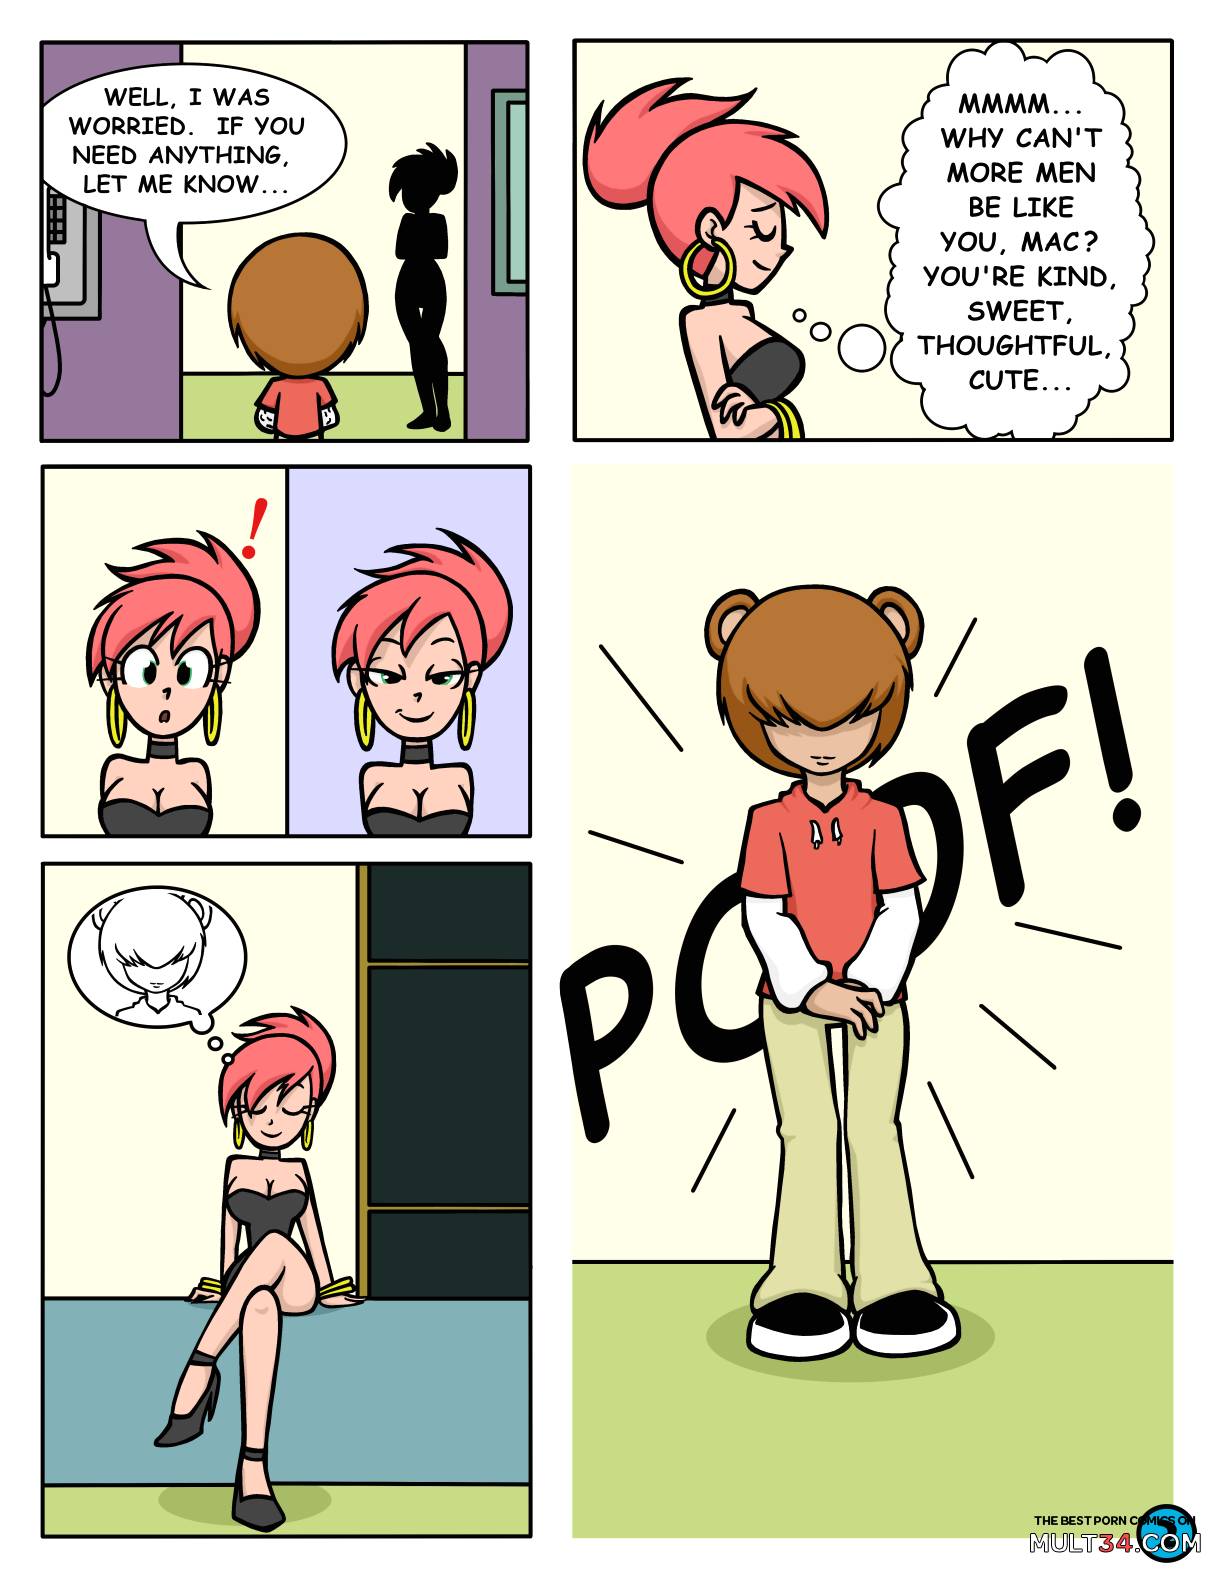 Imaginary lover page 3